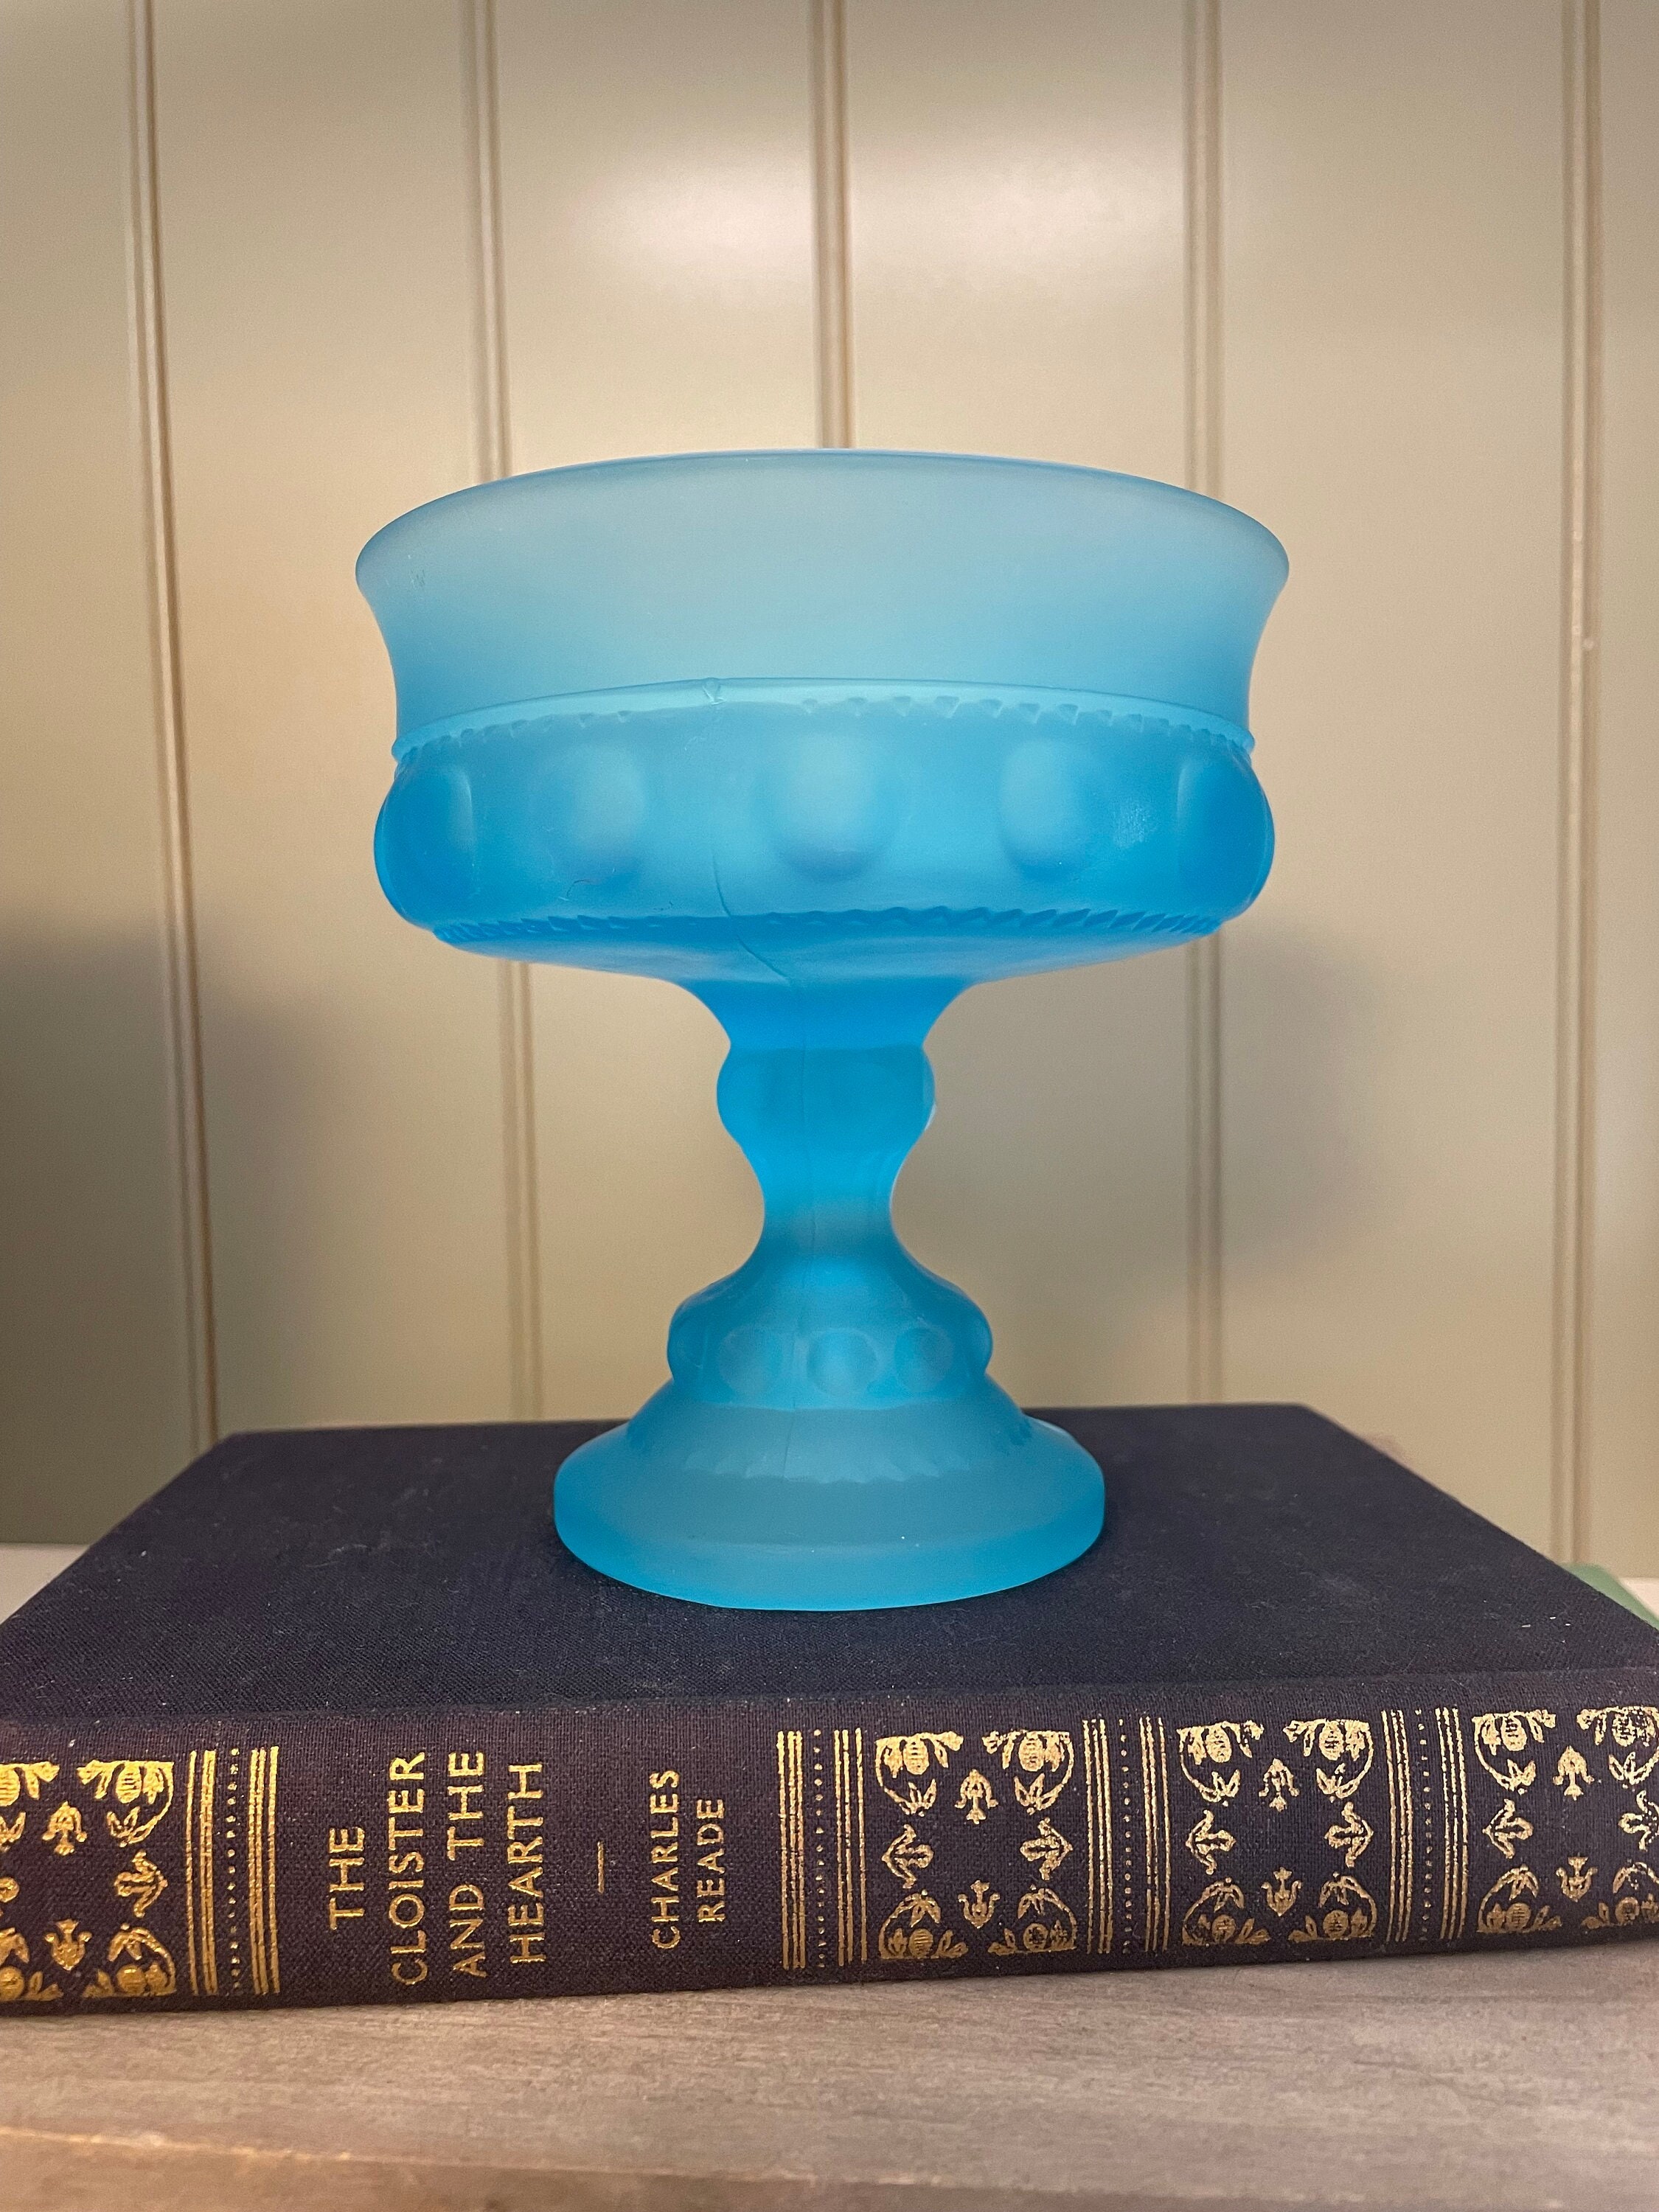 Frosted Tiffany Blue Glass Votive Cup